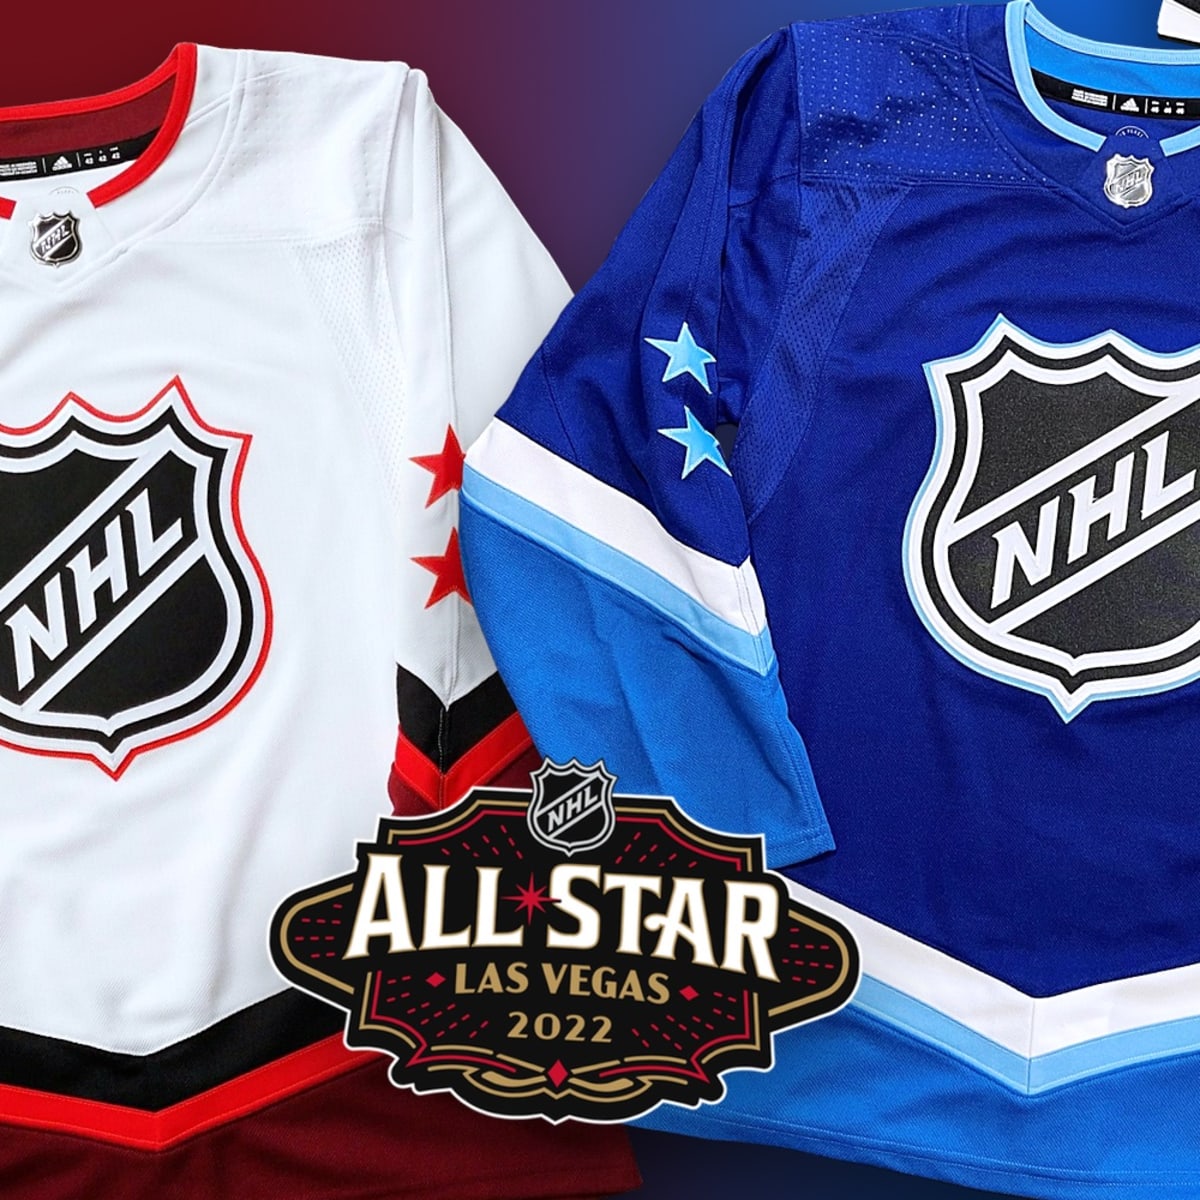 2022 All-Star Game Jerseys Reportedly Leak - The Hockey News